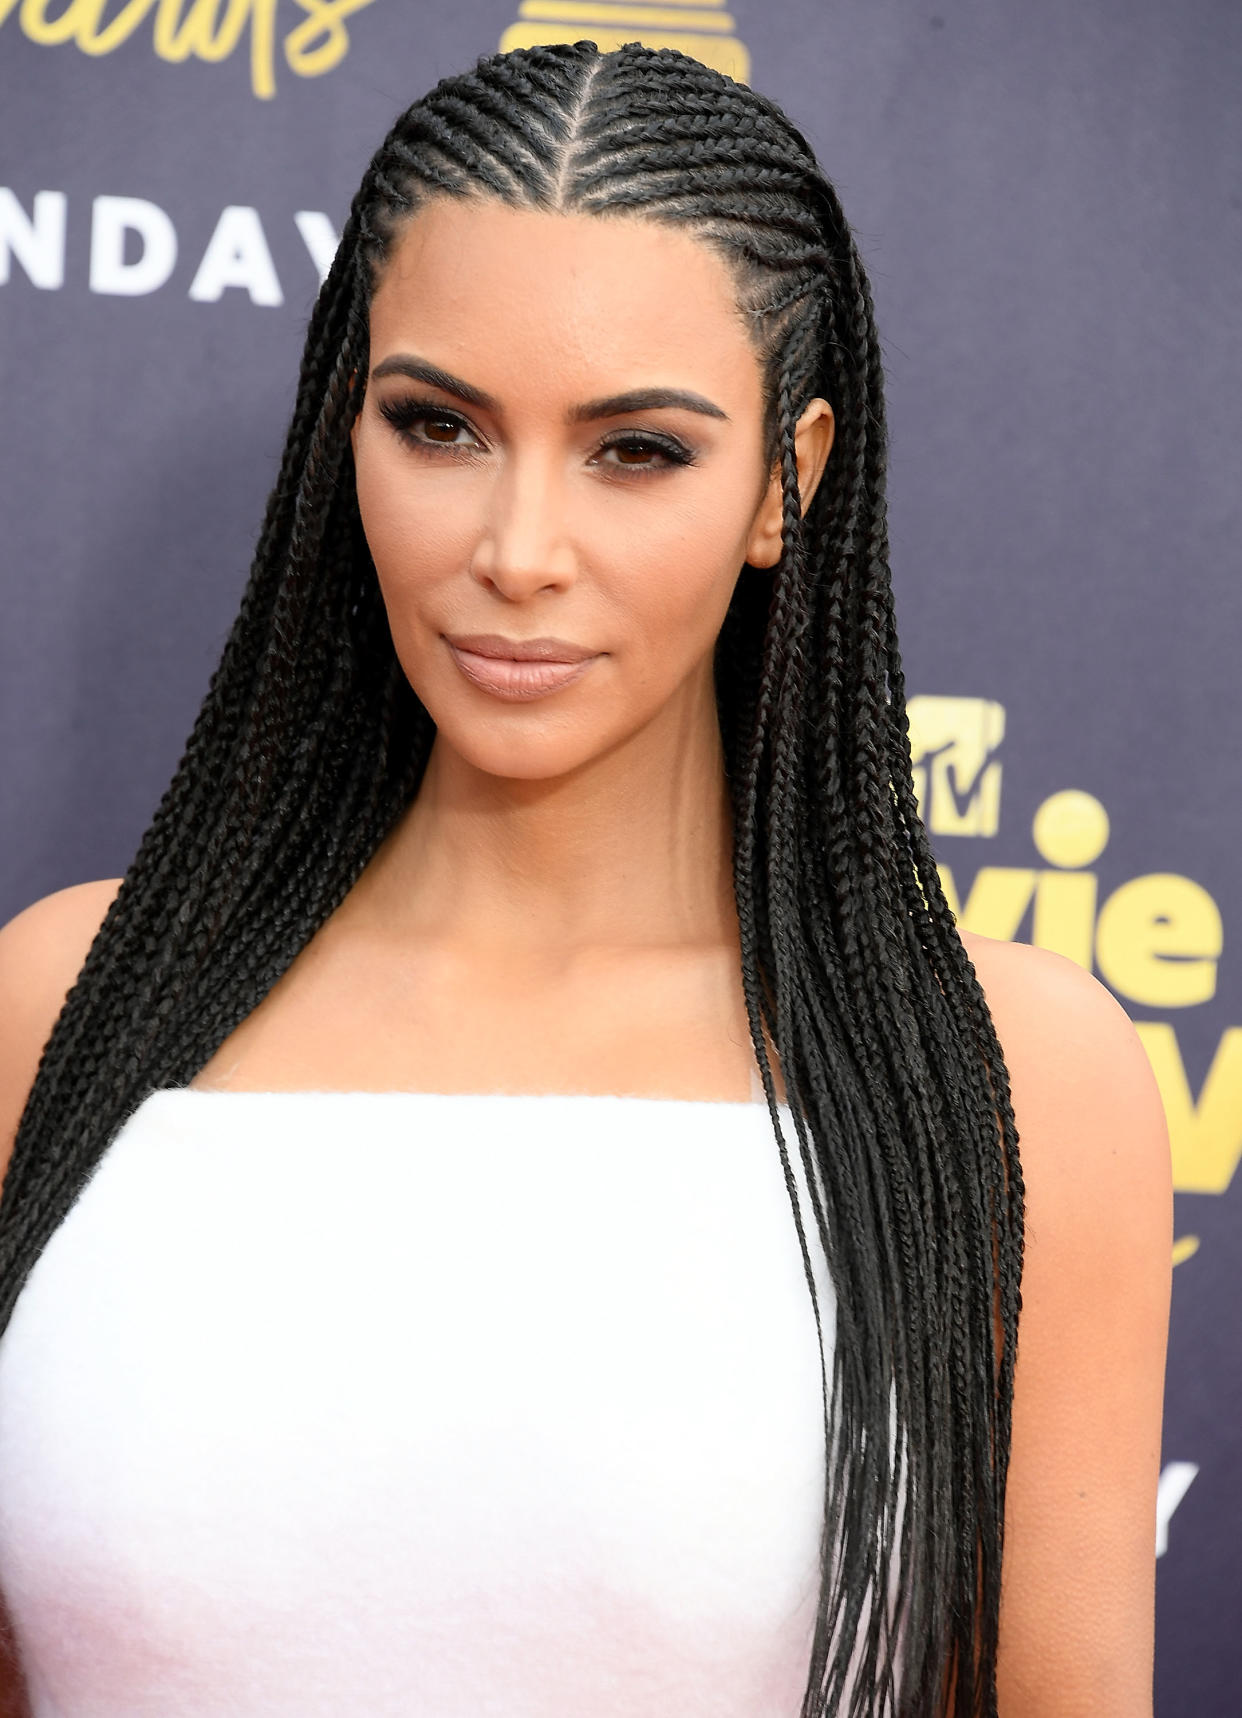 Kim Kardashian West, seen here at the 2018 MTV Movie And TV Awards, has been accused by some of altering her appearance to resemble a Black woman. (Getty Images)